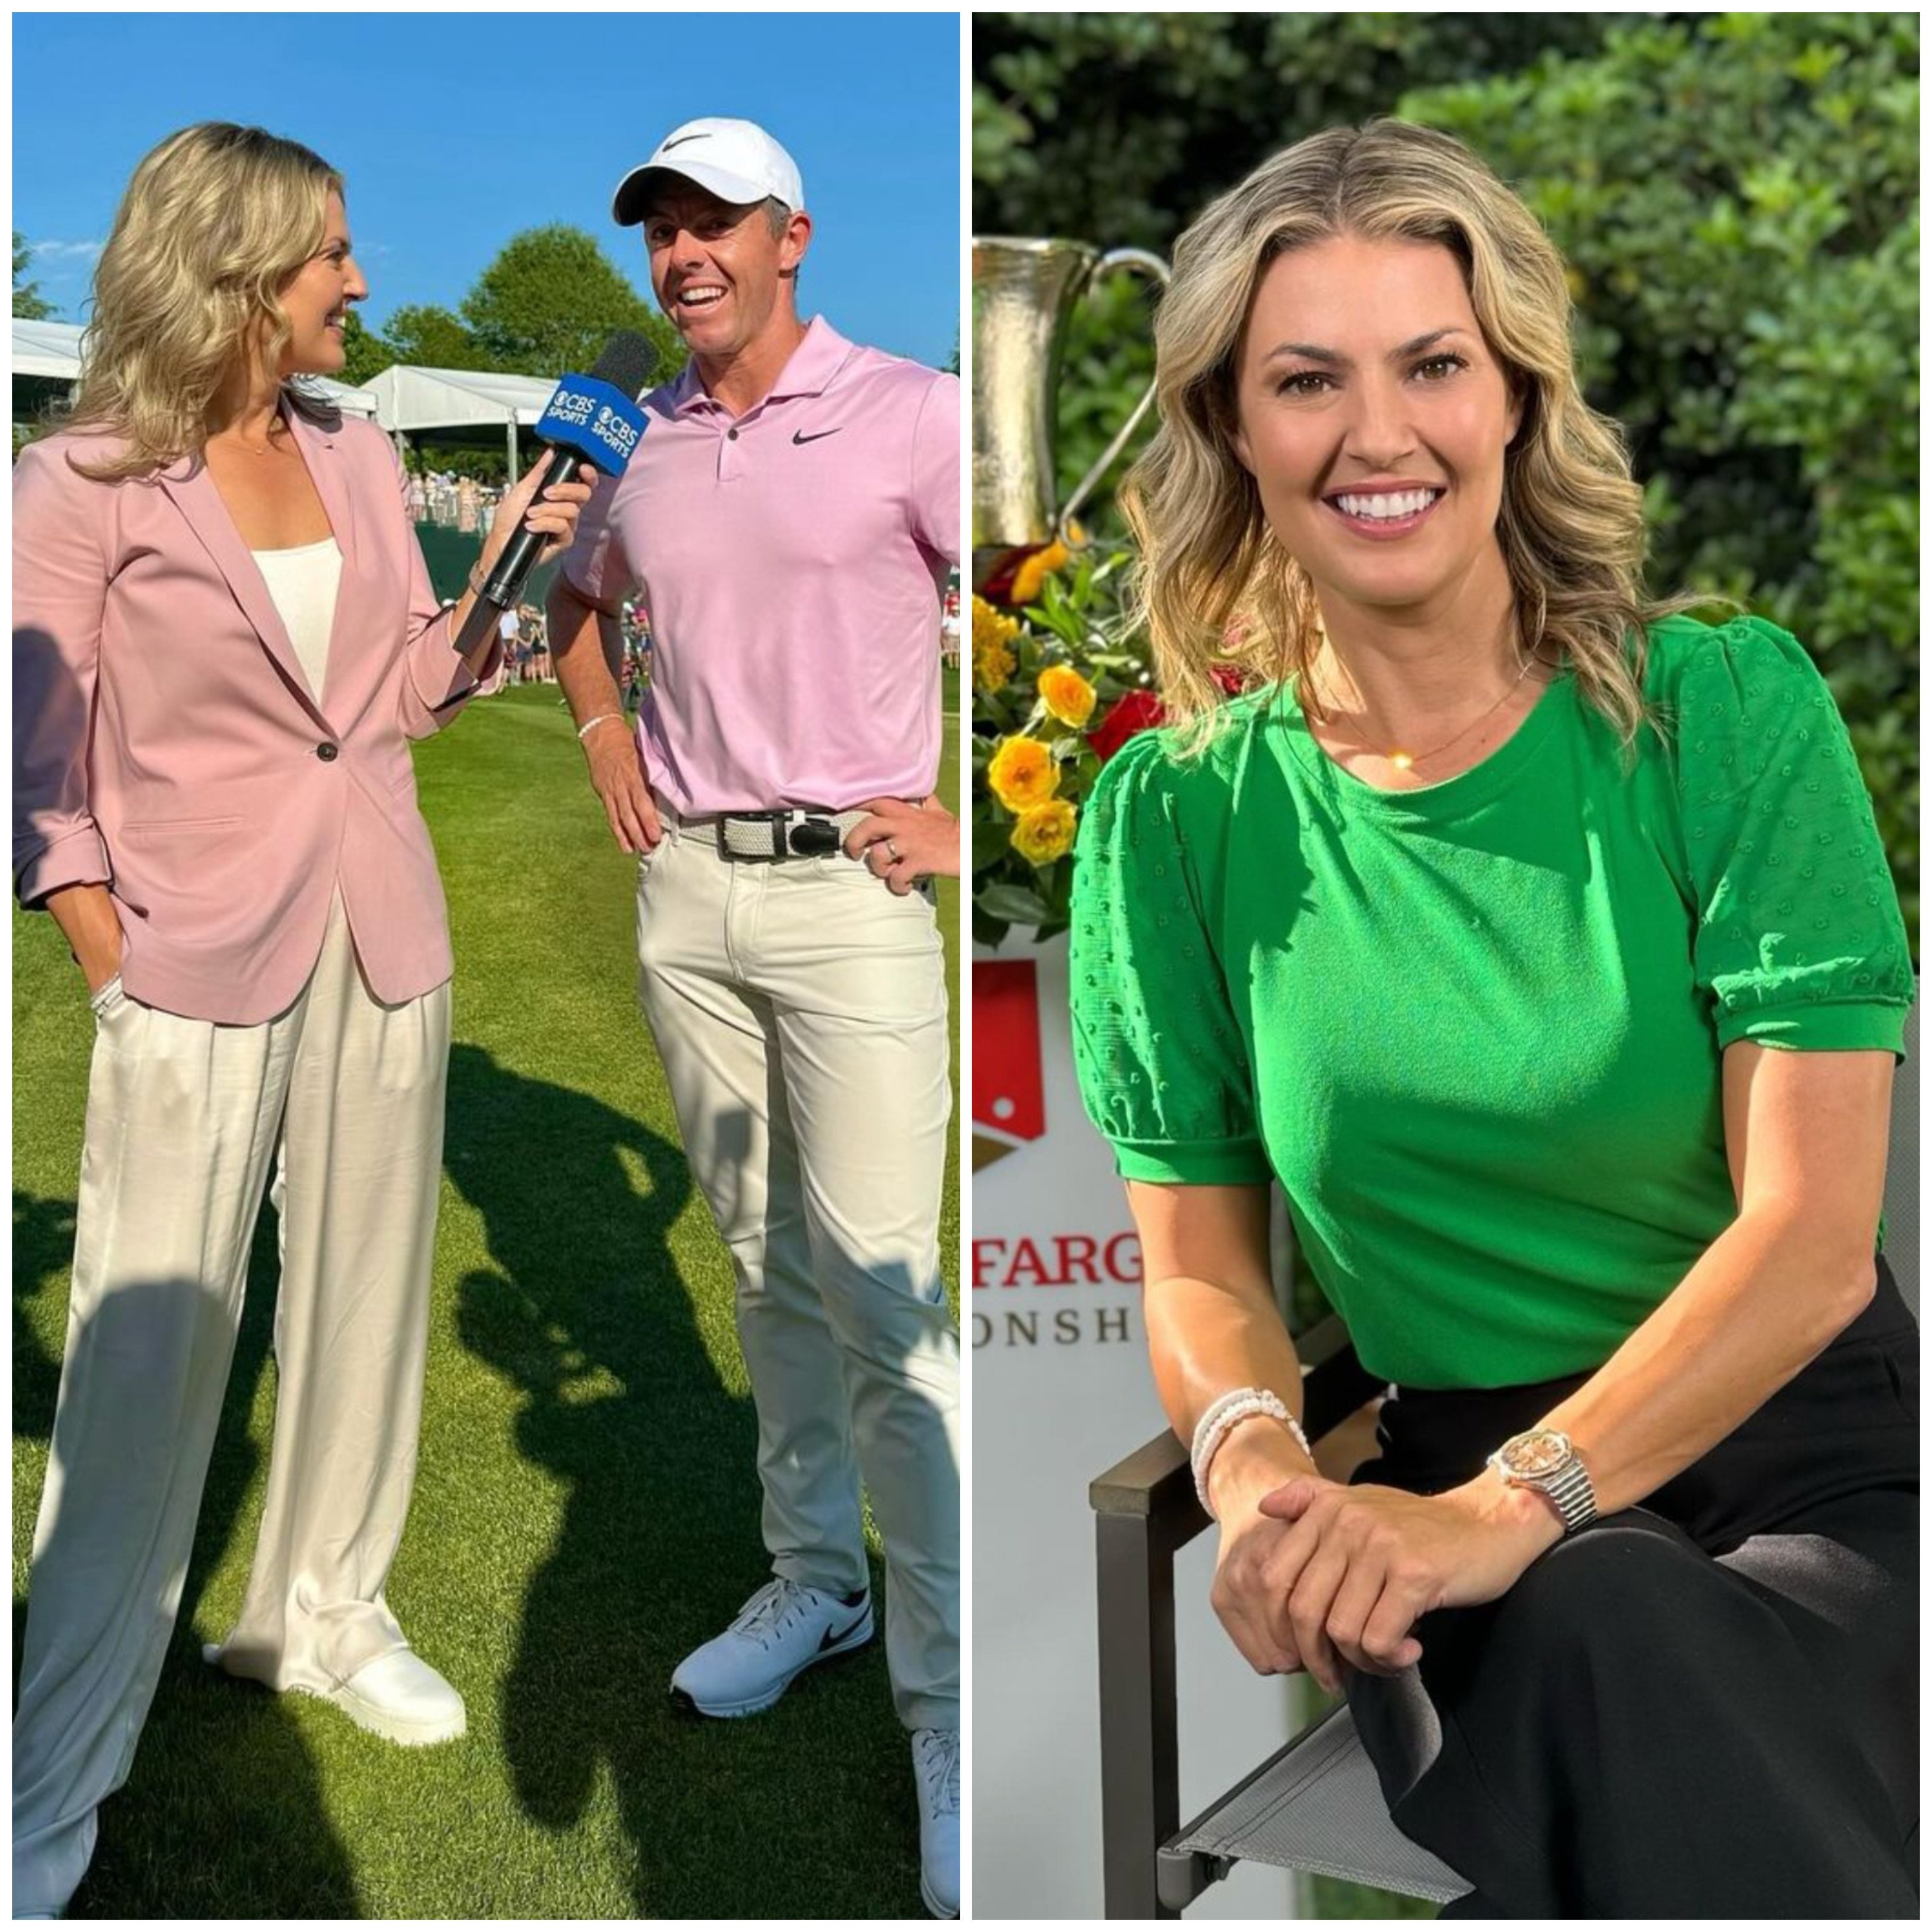 Amanda Balionis is a regular fixture in the world of golf, and has had several interactions with Rory McIlroy lately, sparking dating rumours. Photos: @balionis/Instagram 